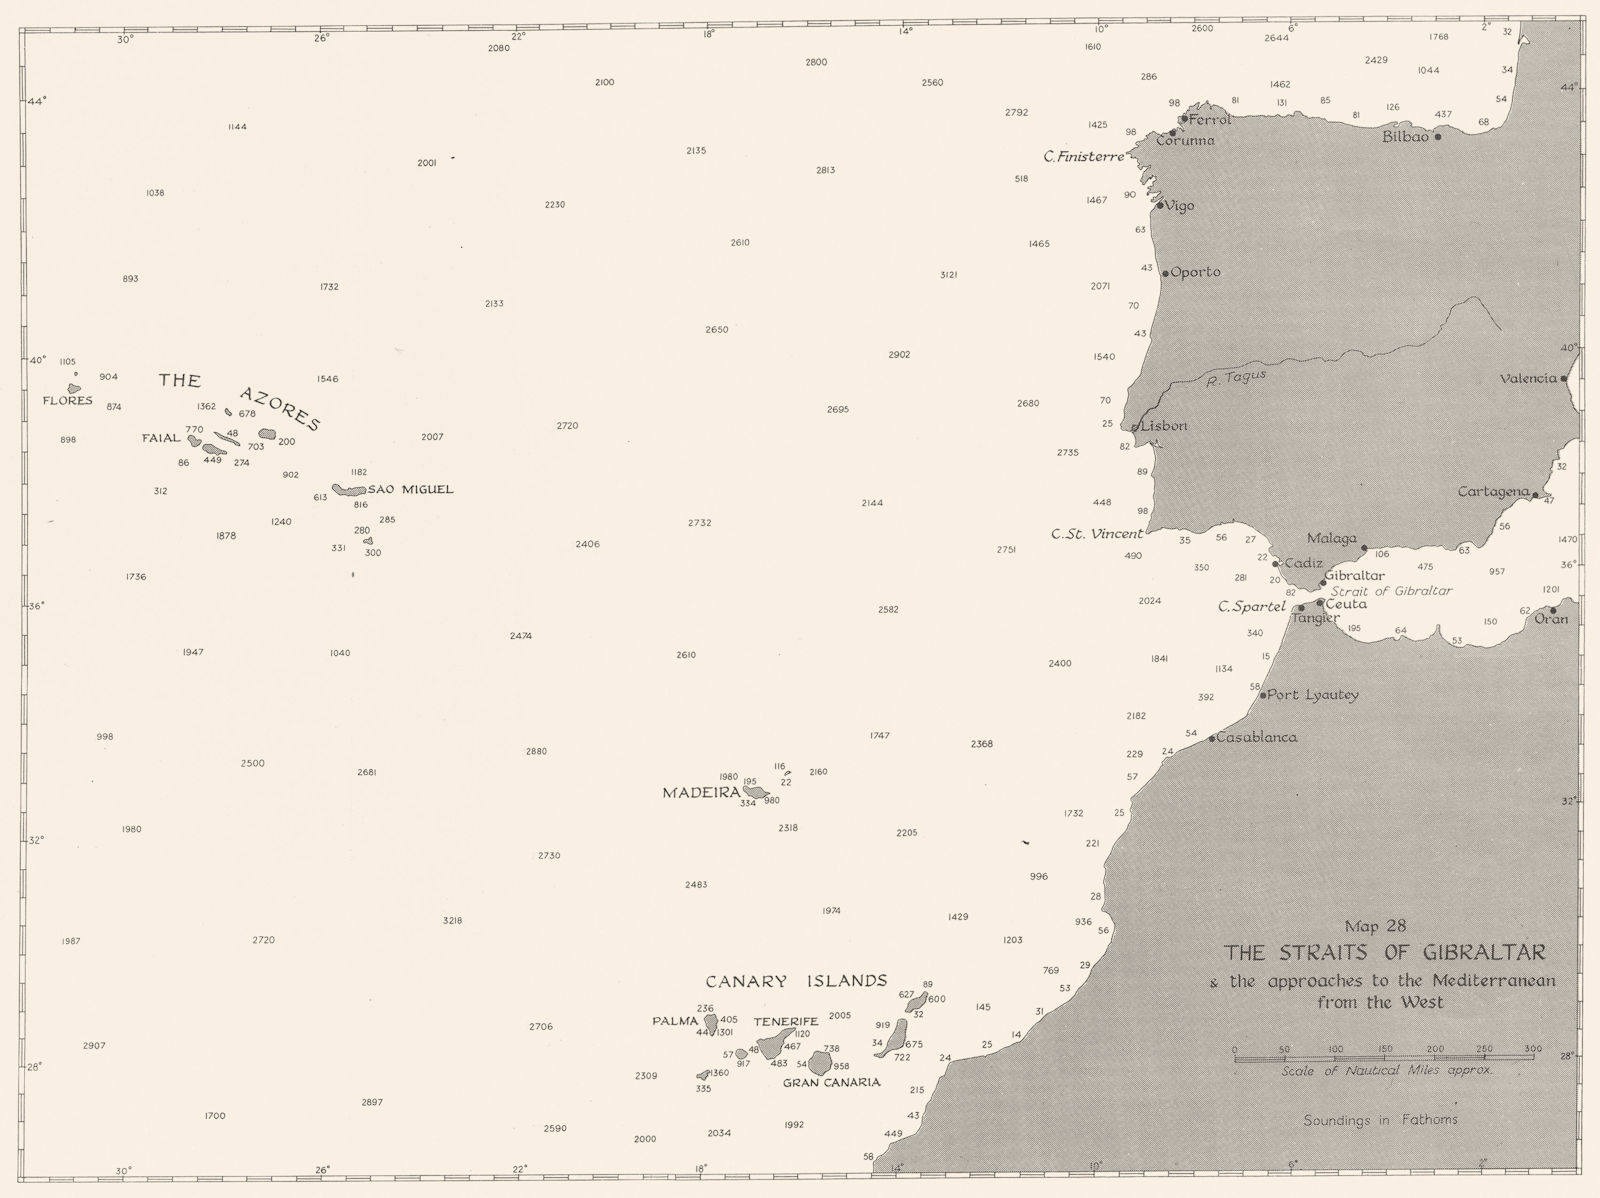 GIBRALTAR. Jan-May 1941. Straits of & approaches to Mediterranean west 1954 map